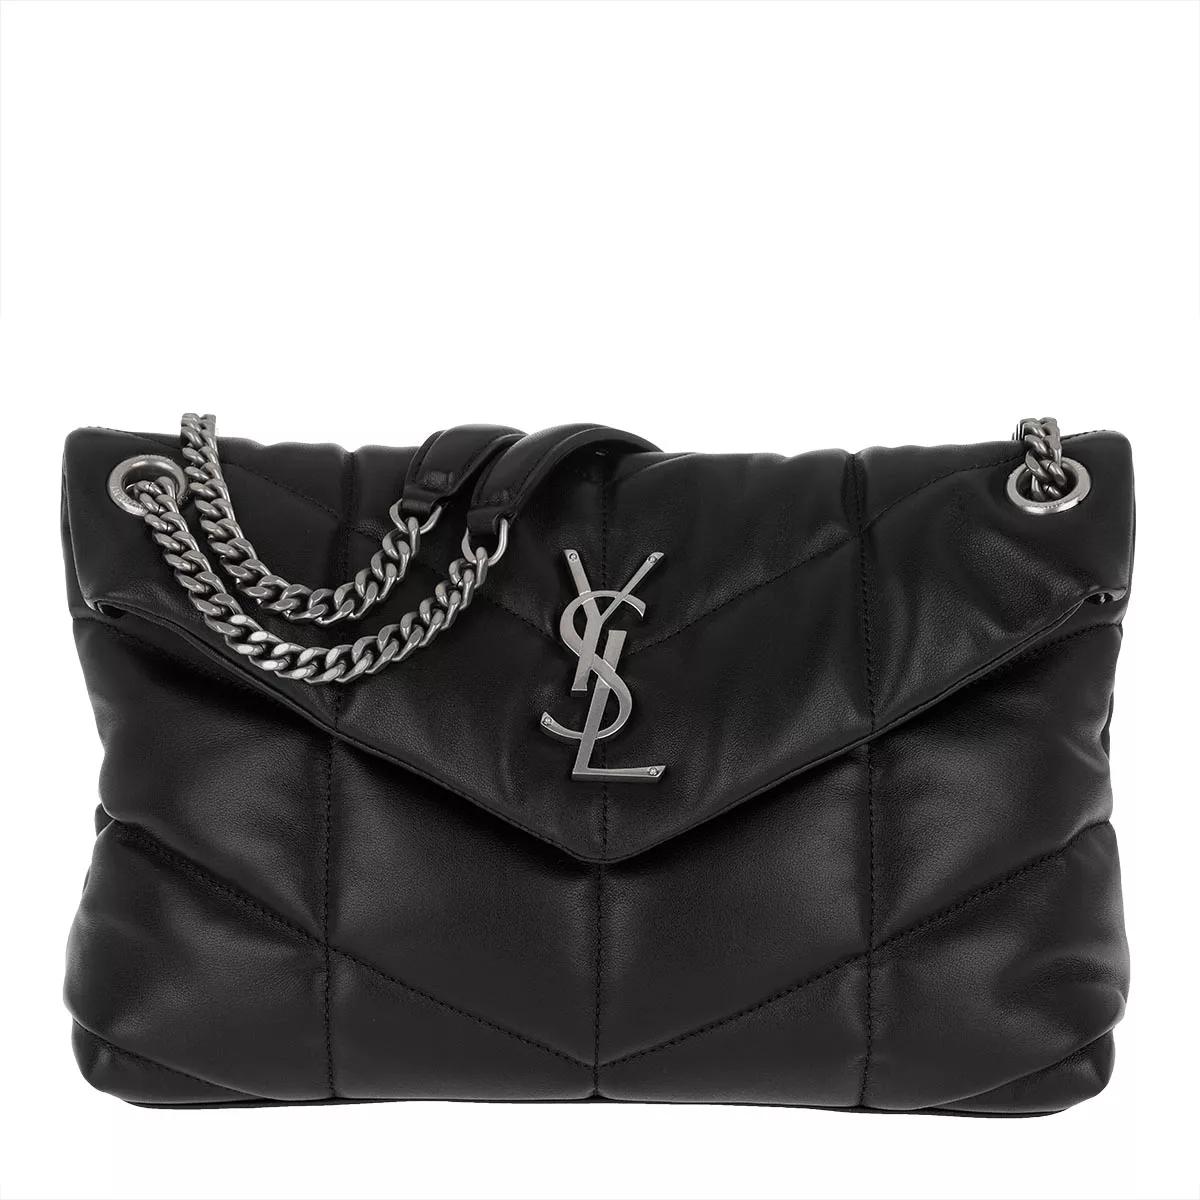 Saint Laurent - Loulou Toy Black Quilted Leather Mini Bag